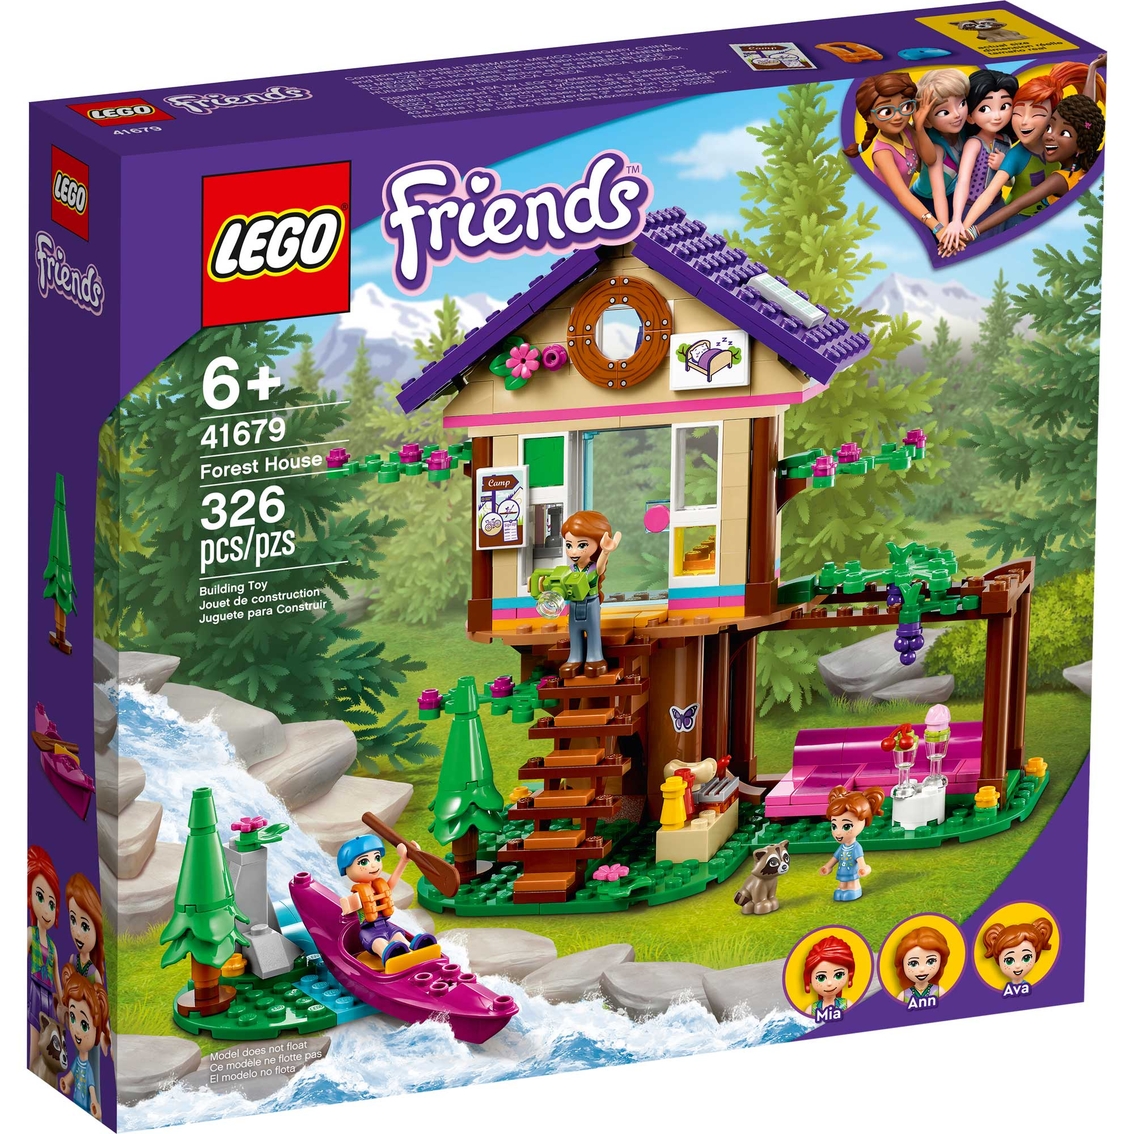 LEGO Friends Forest House 41679 - Image 1 of 2